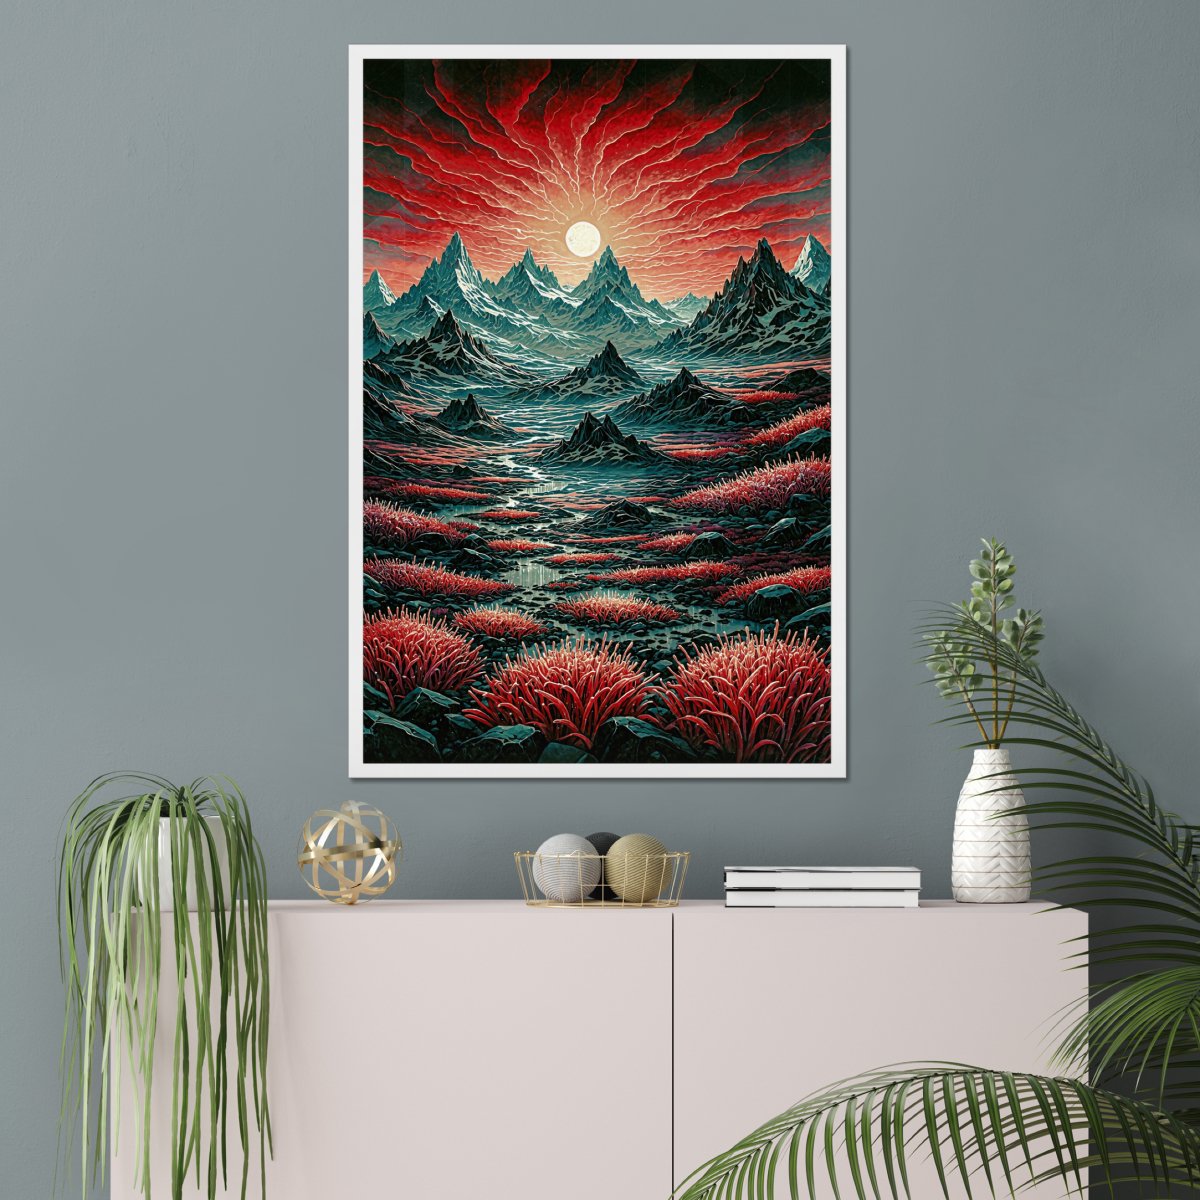 Swirling flares - Art print - Poster - Ever colorful